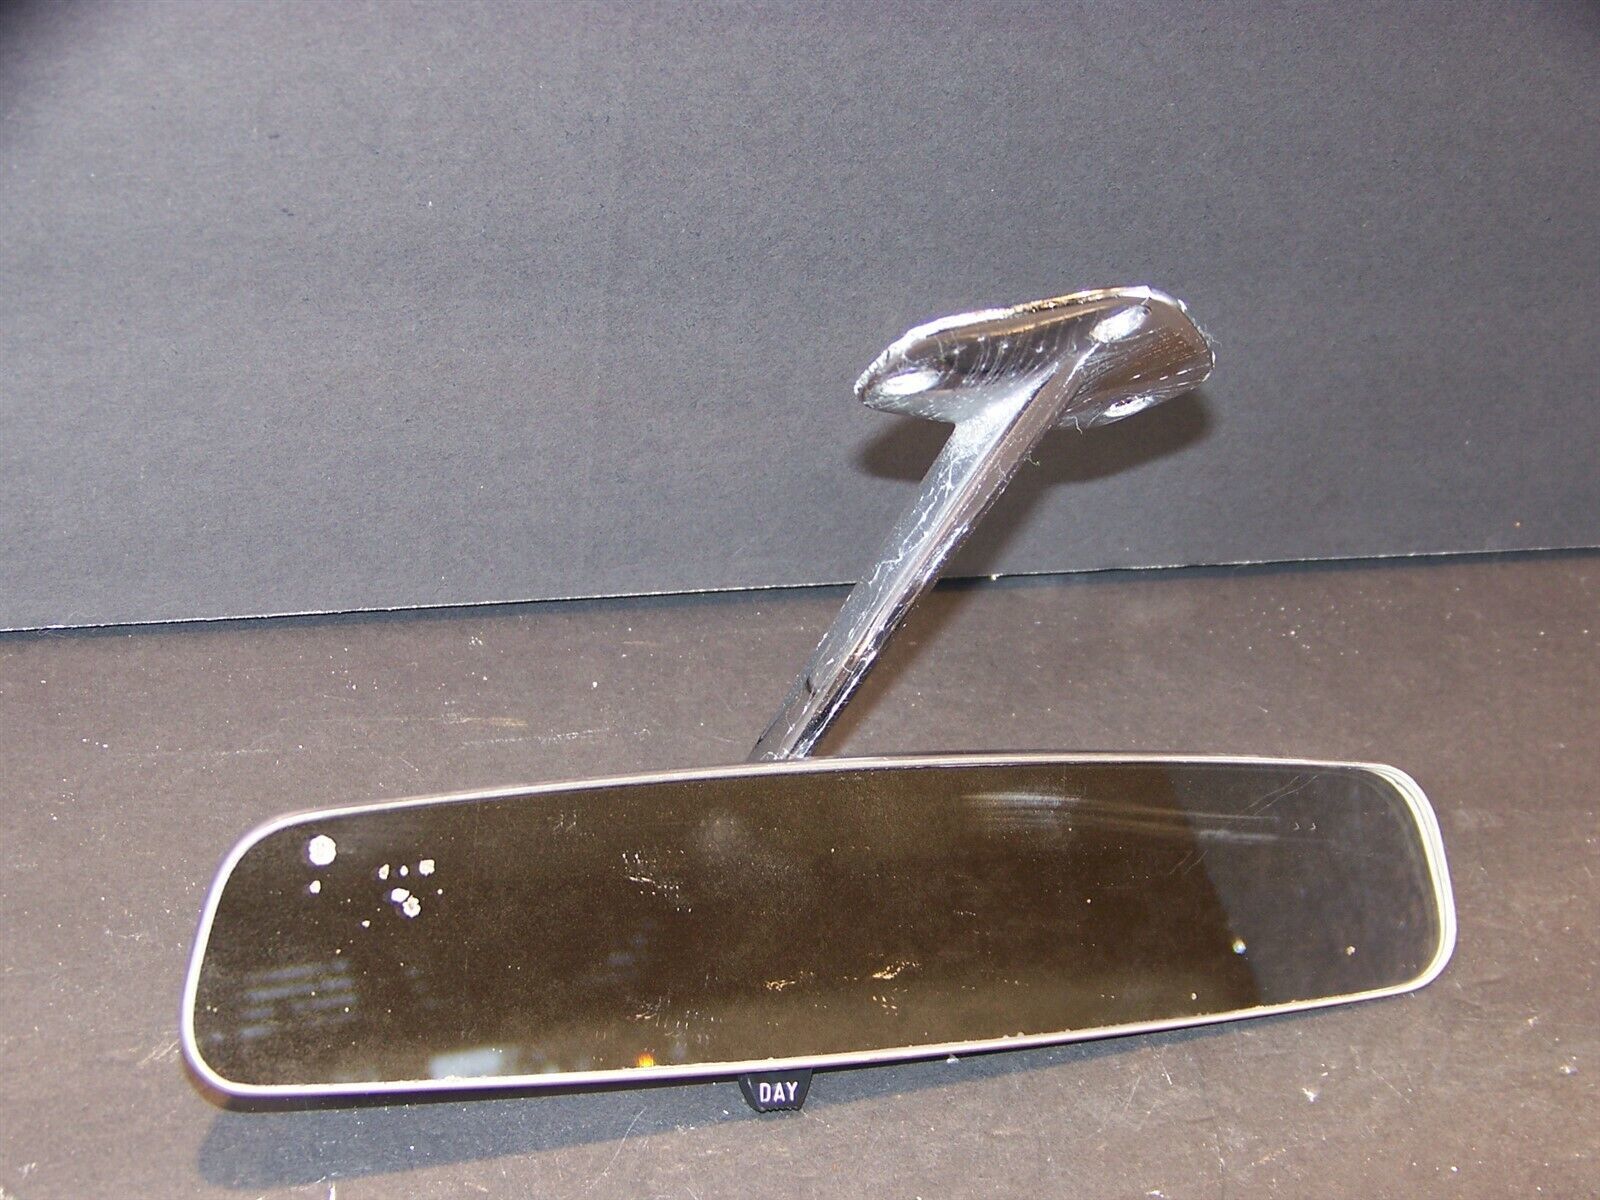 1964 PLYMOUTH VALIANT DAY NIGHT REAR VIEW MIRROR OEM - $89.98